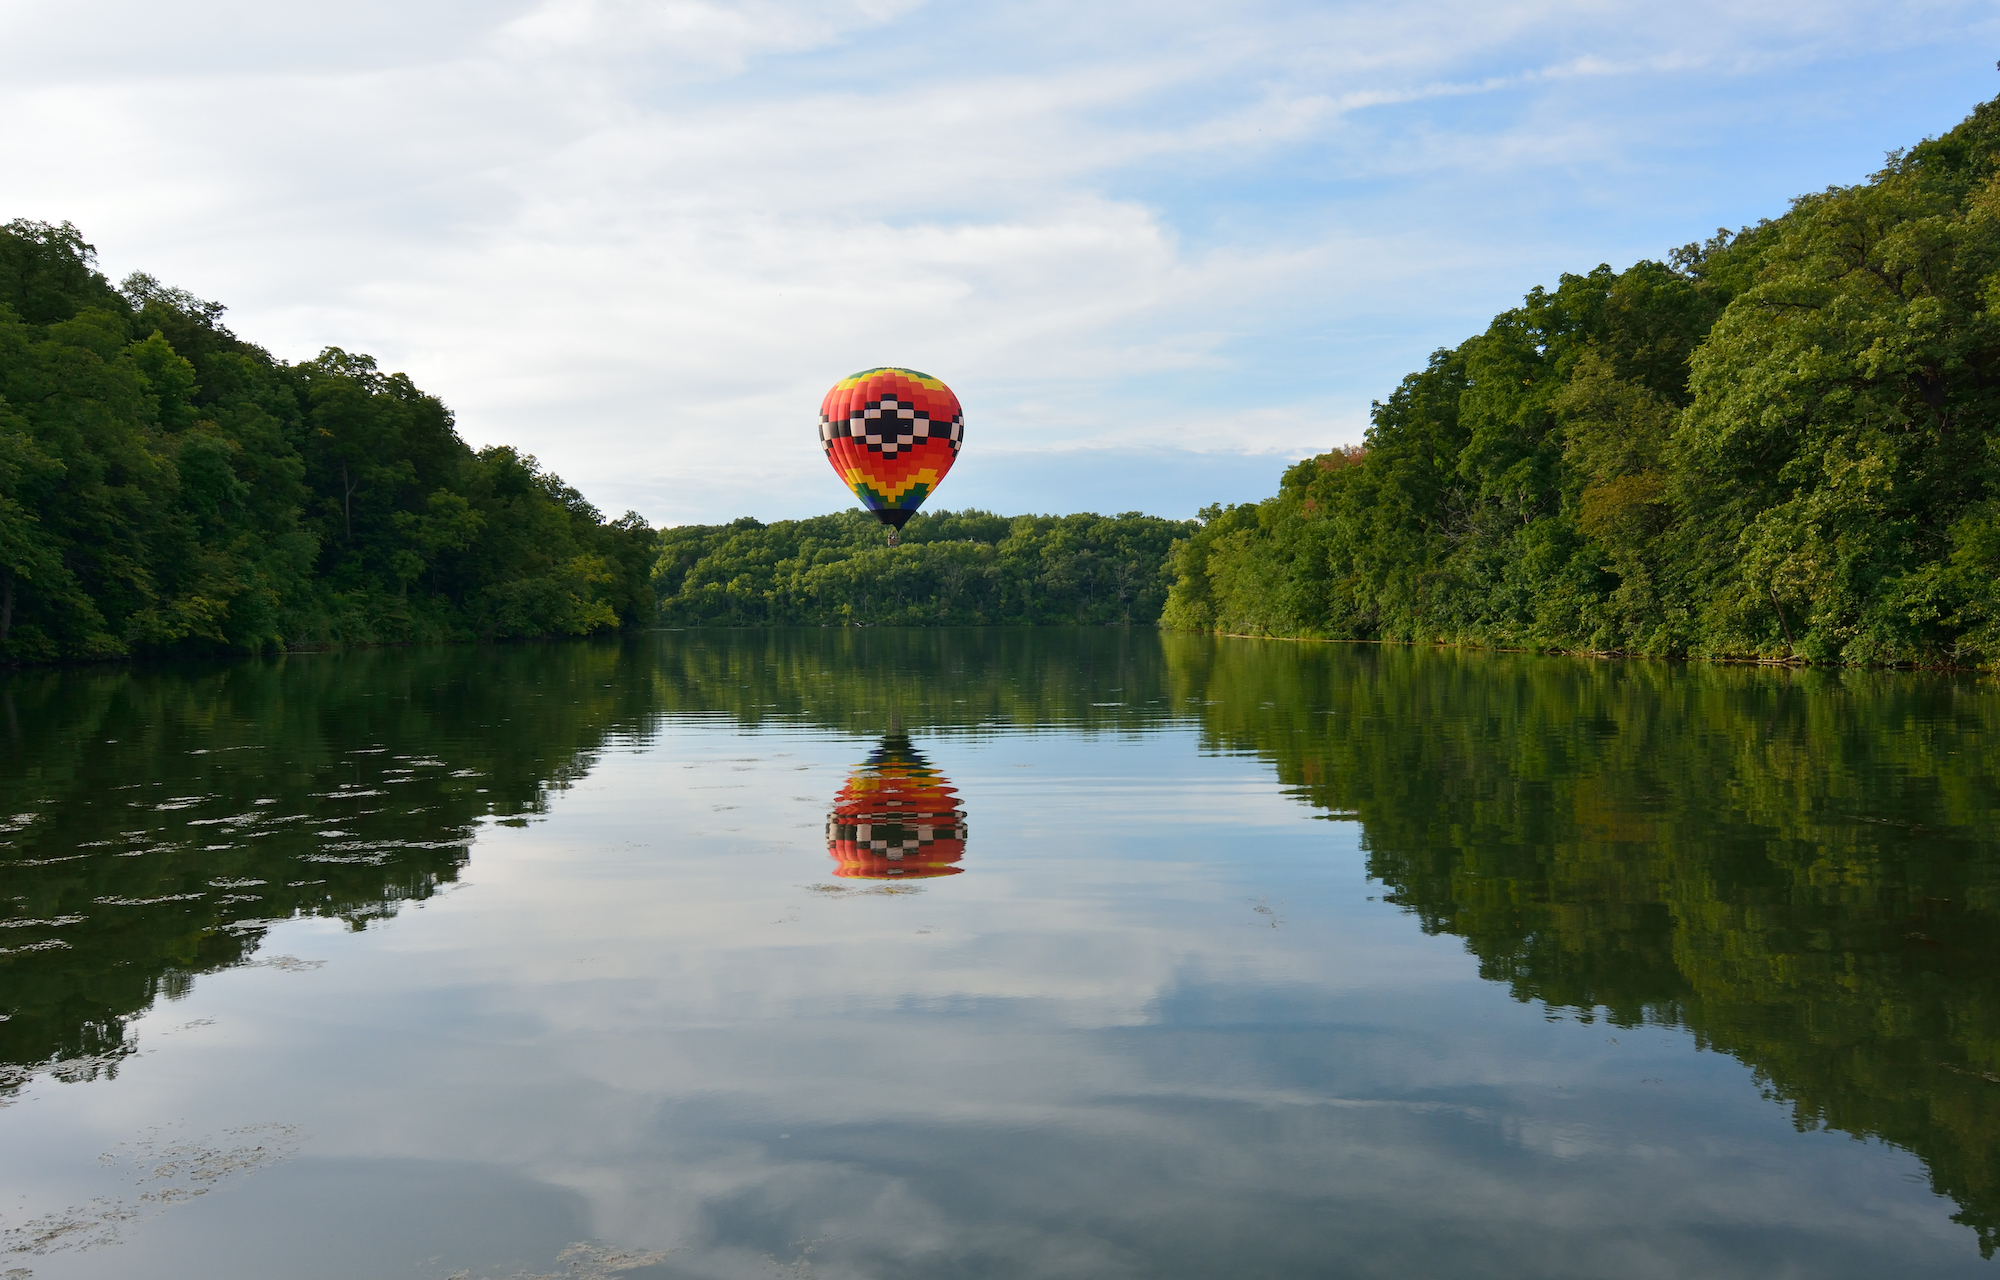 Thousands Flock to the Great Galena Balloon Race June 2123, 2019 at